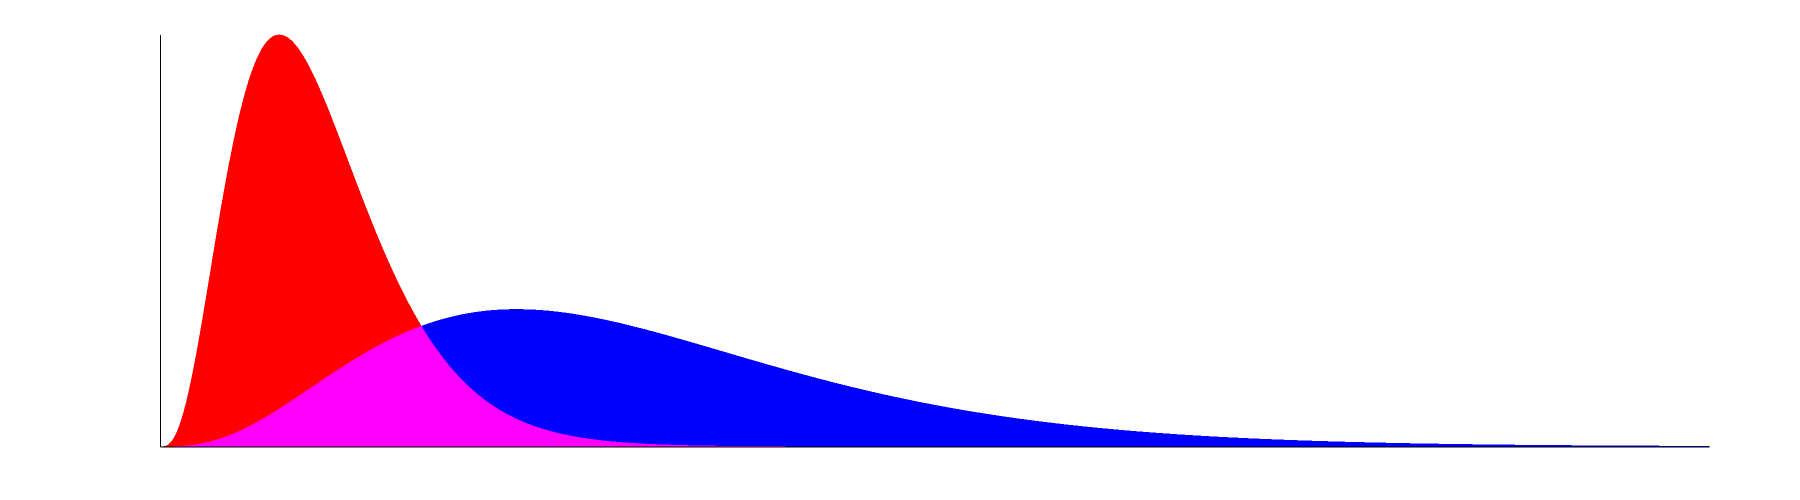 Gamma distributions with (k=4, theta=1) in red, (k=4, theta=3) in blue